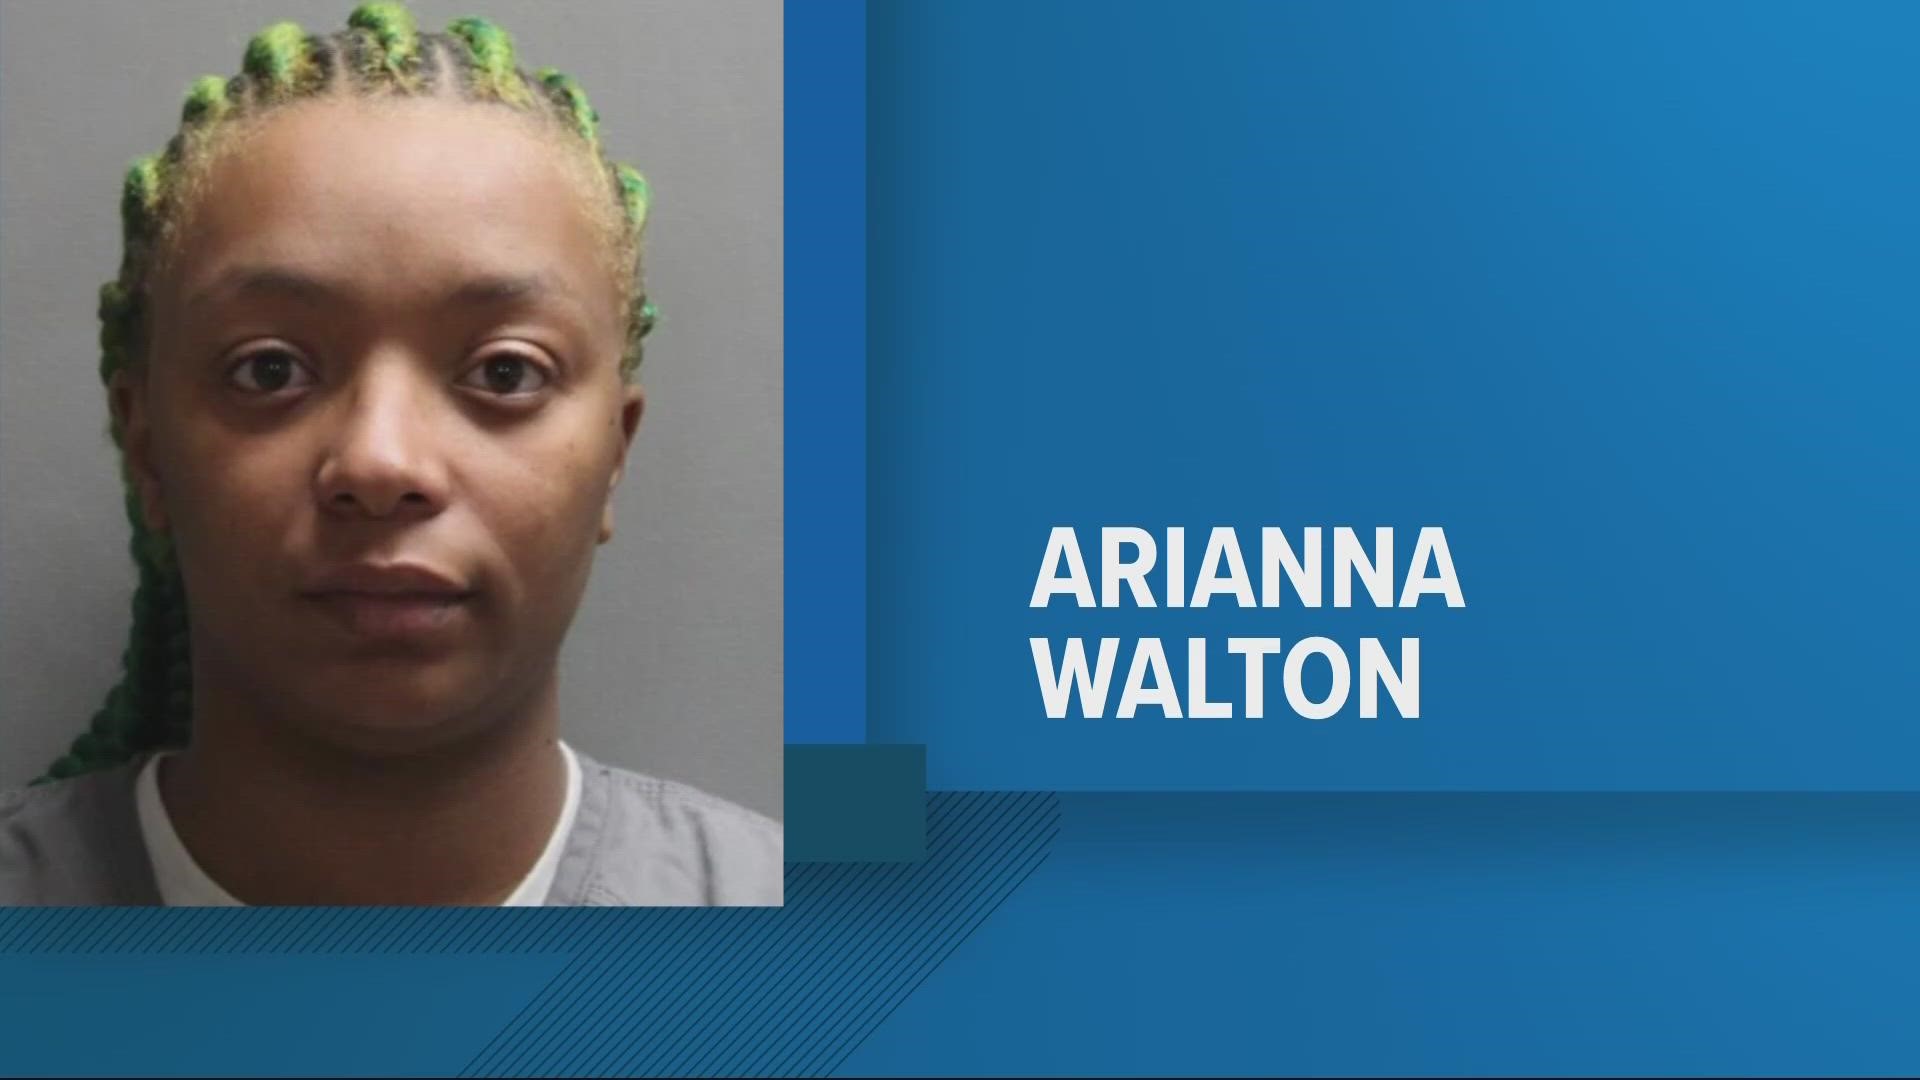 Jacksonville police responded to Wolfson Children's Hospital after a child came in with numerous injuries that caused concern, according to the arrest report.